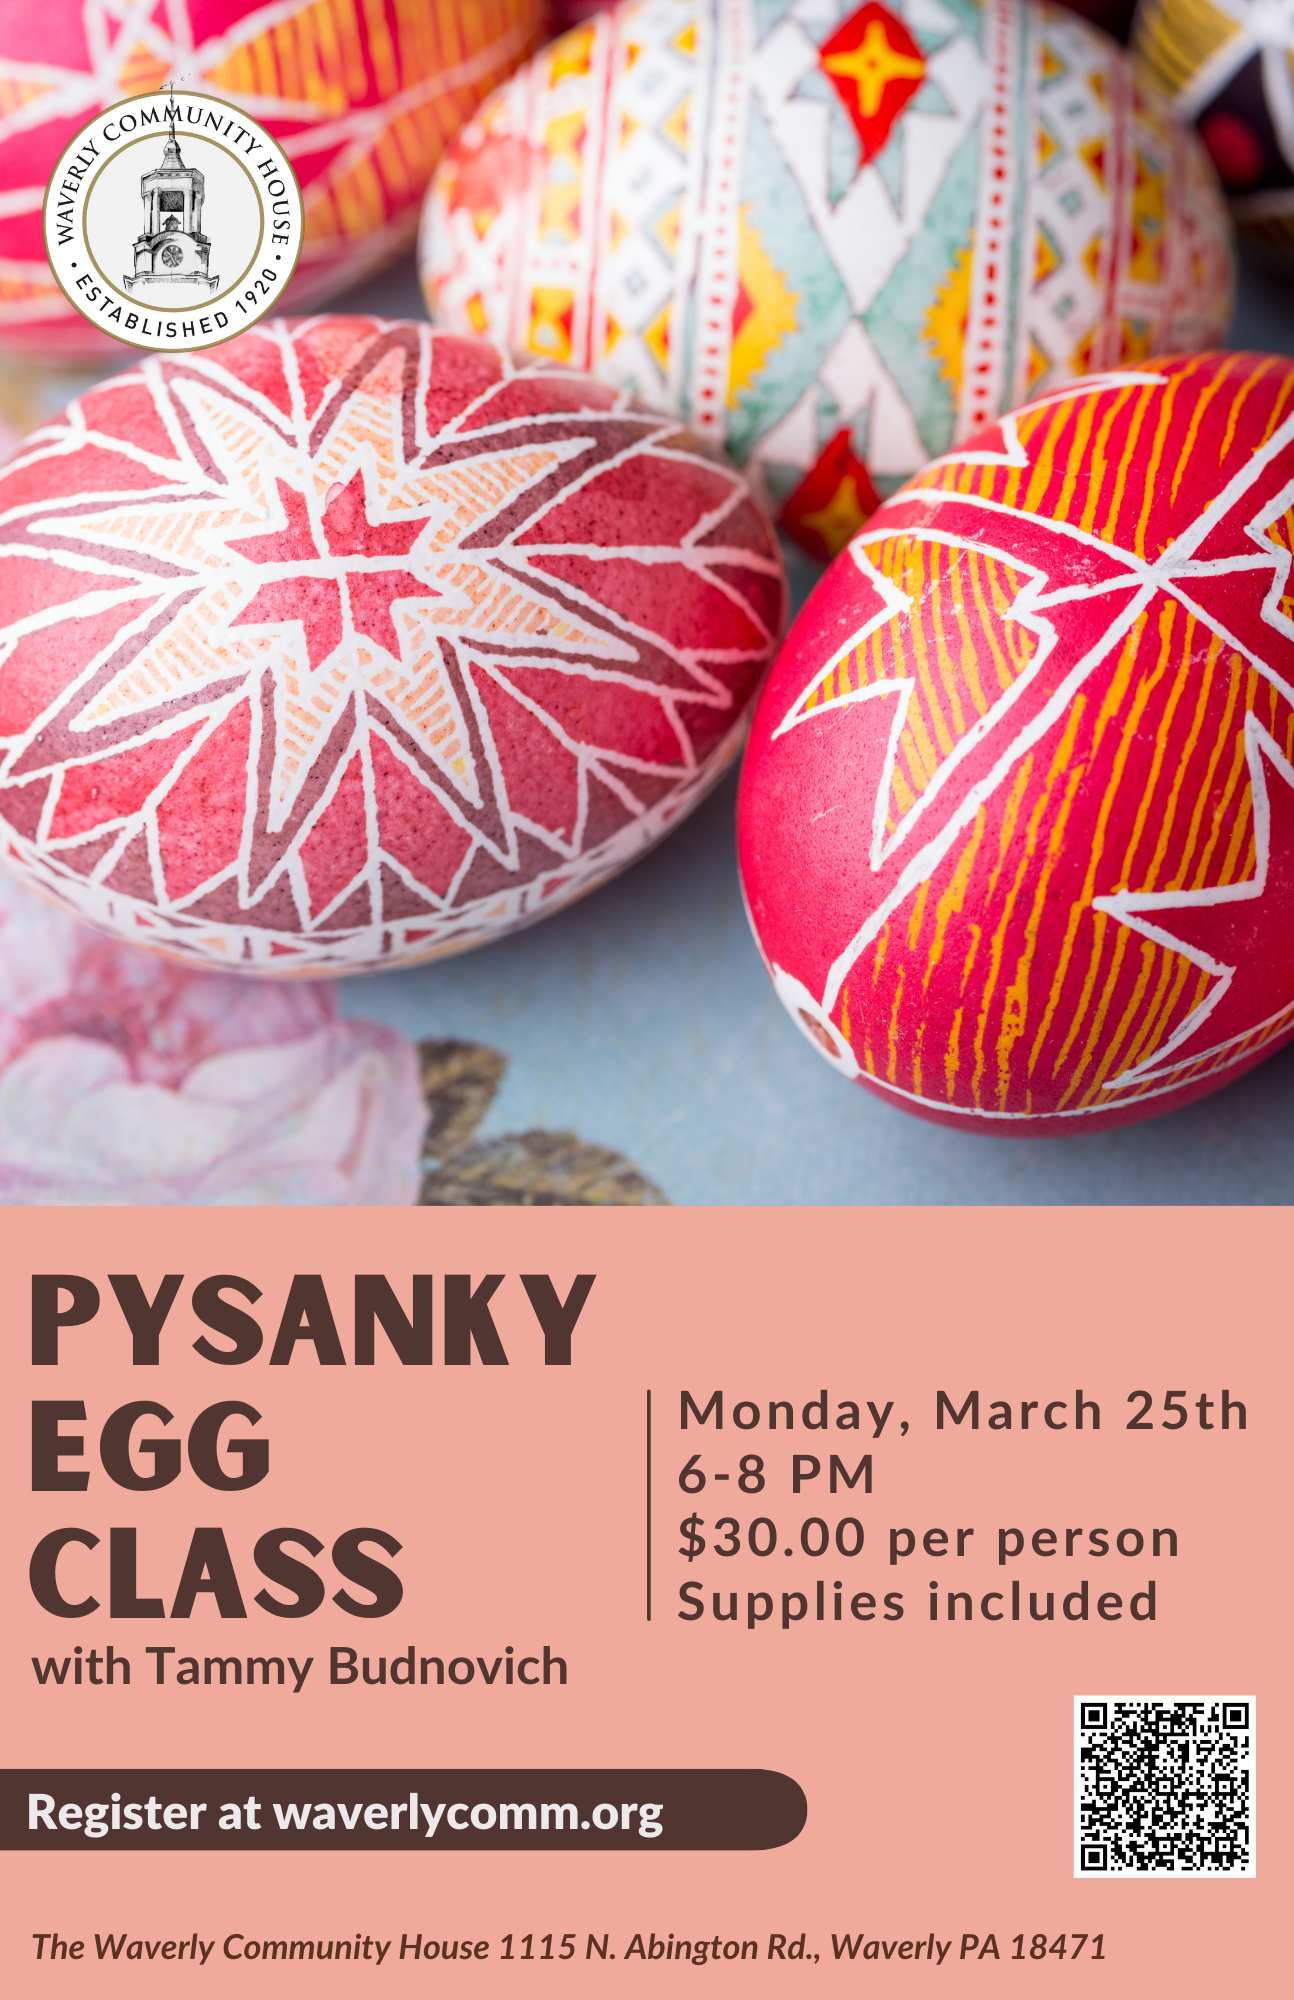 **CLASS FILLED** PYSANKY EGG CLASS with Tammy Budnovich